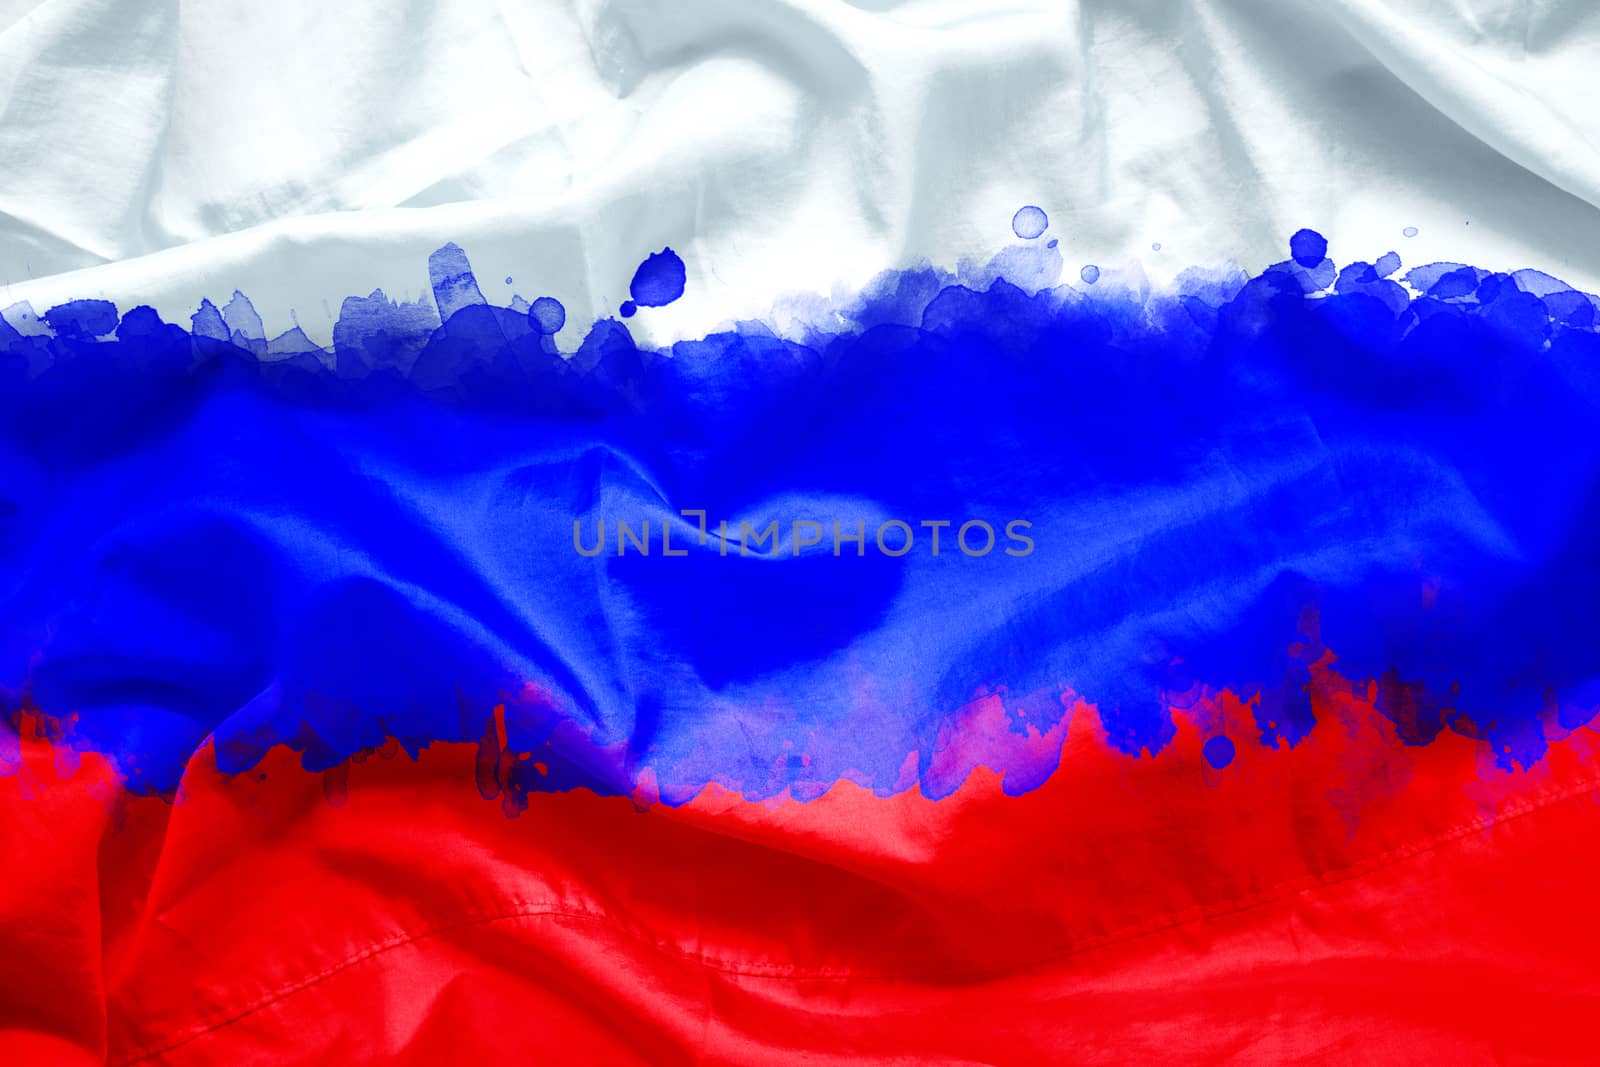 Flag of Russia (Russian Federation) by watercolor paint brush on canvas fabric, grunge style